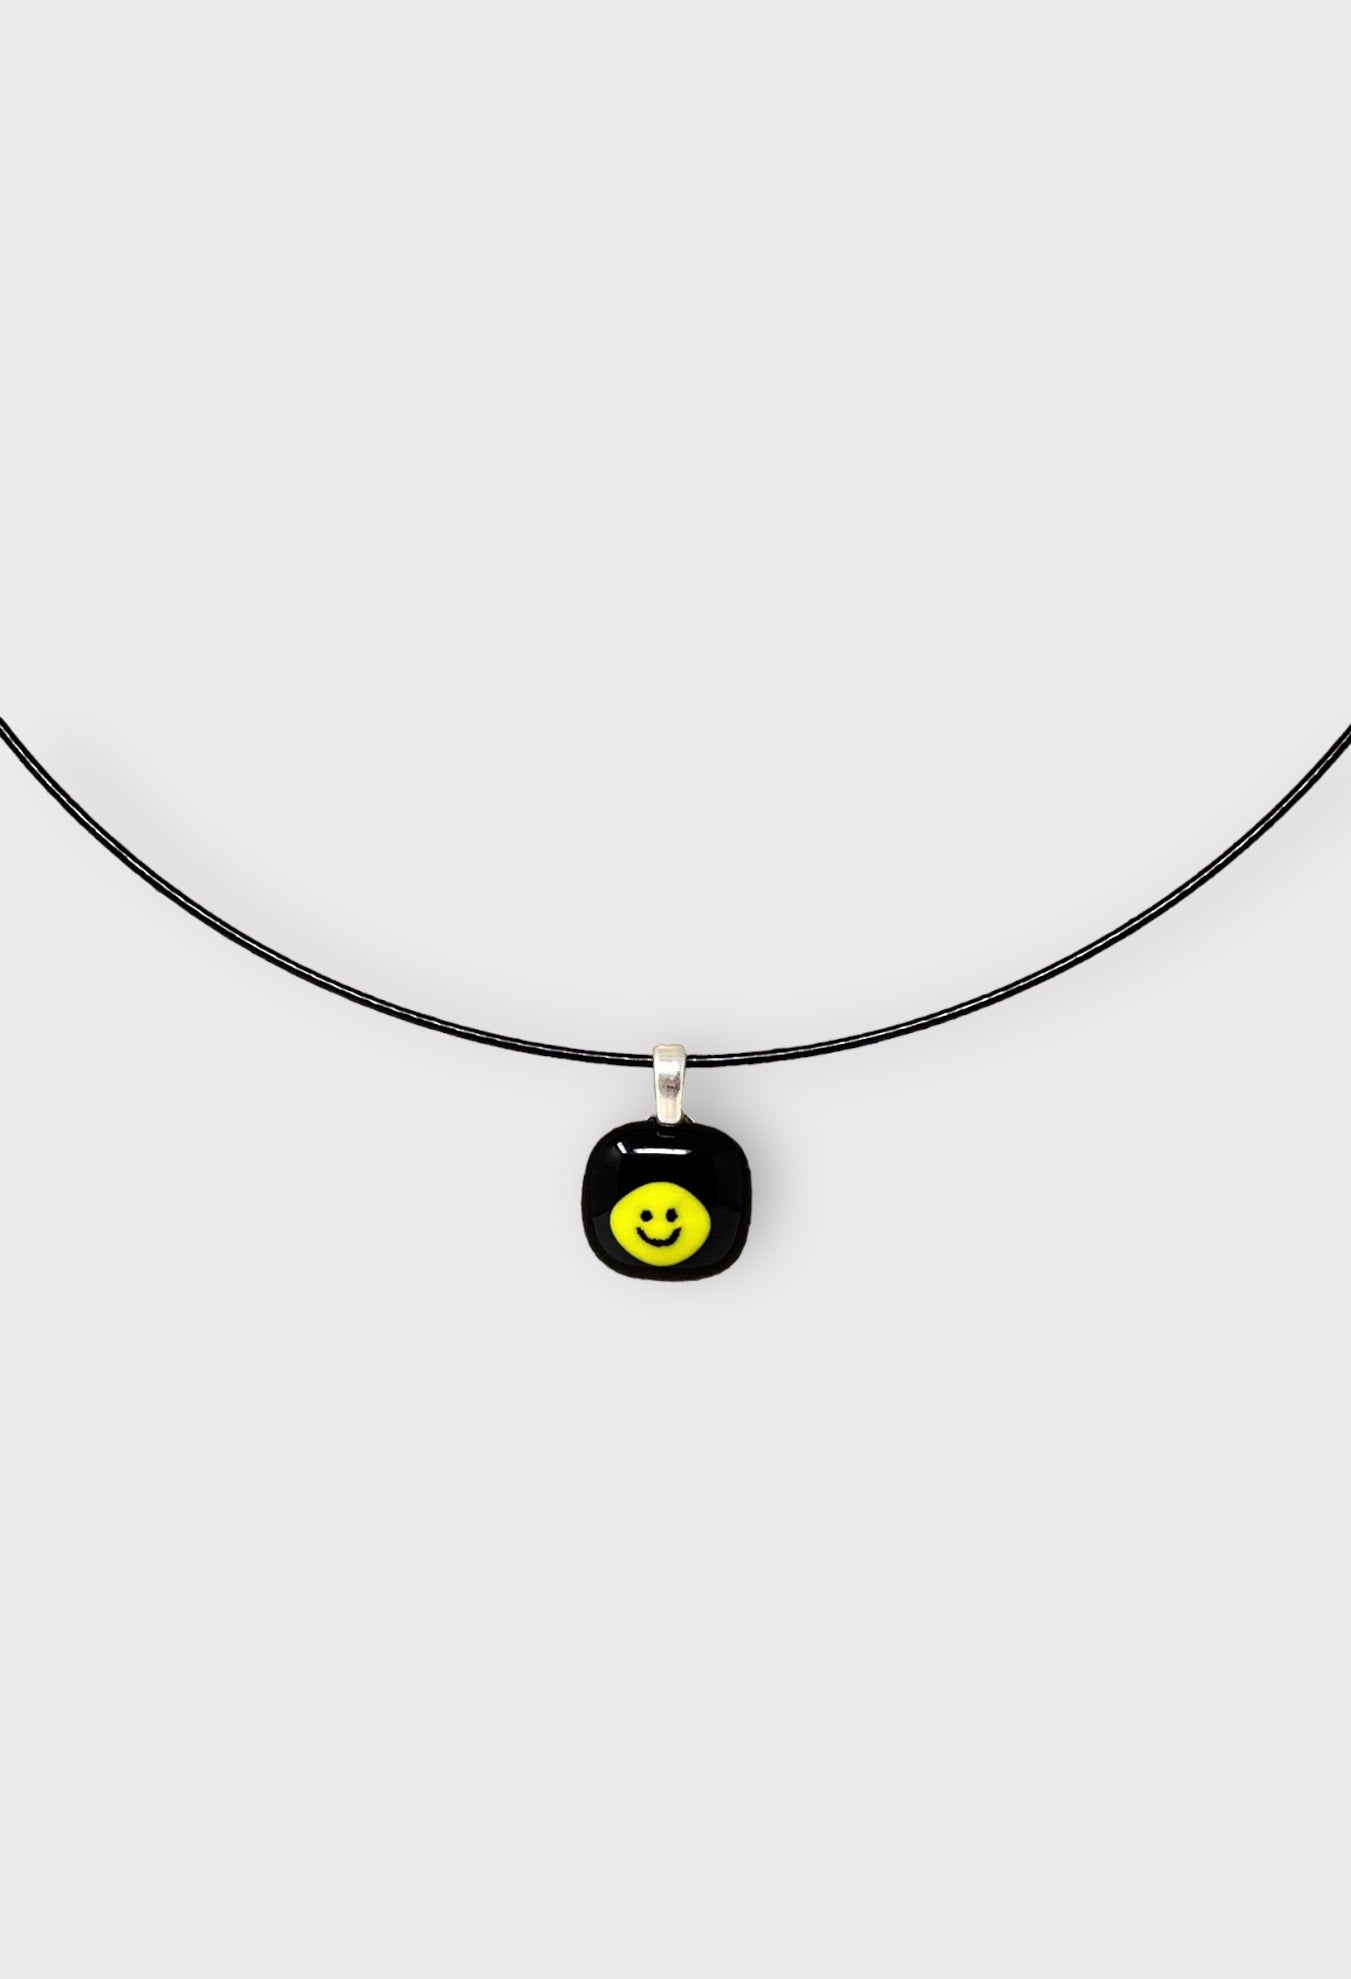 Glass Smiley Face Pendant with Cable Necklace - sm black